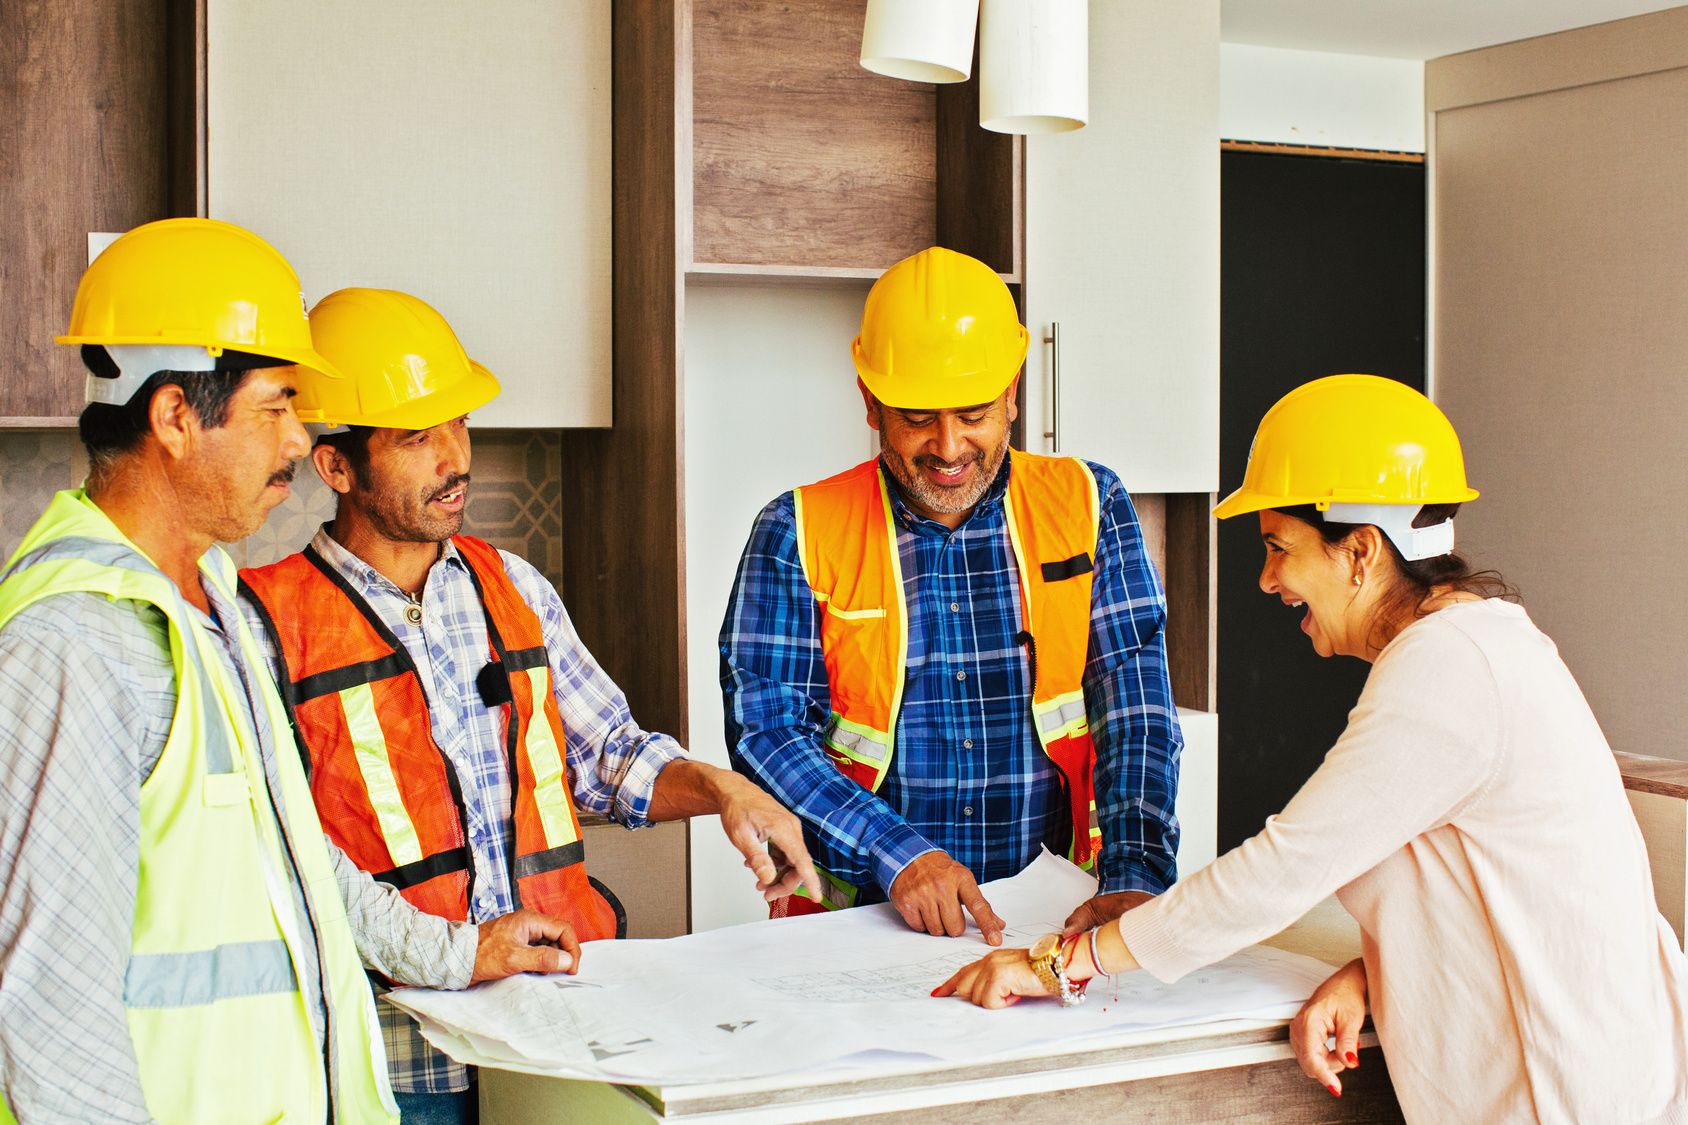 How to Build Teamwork in Construction With Your Crew